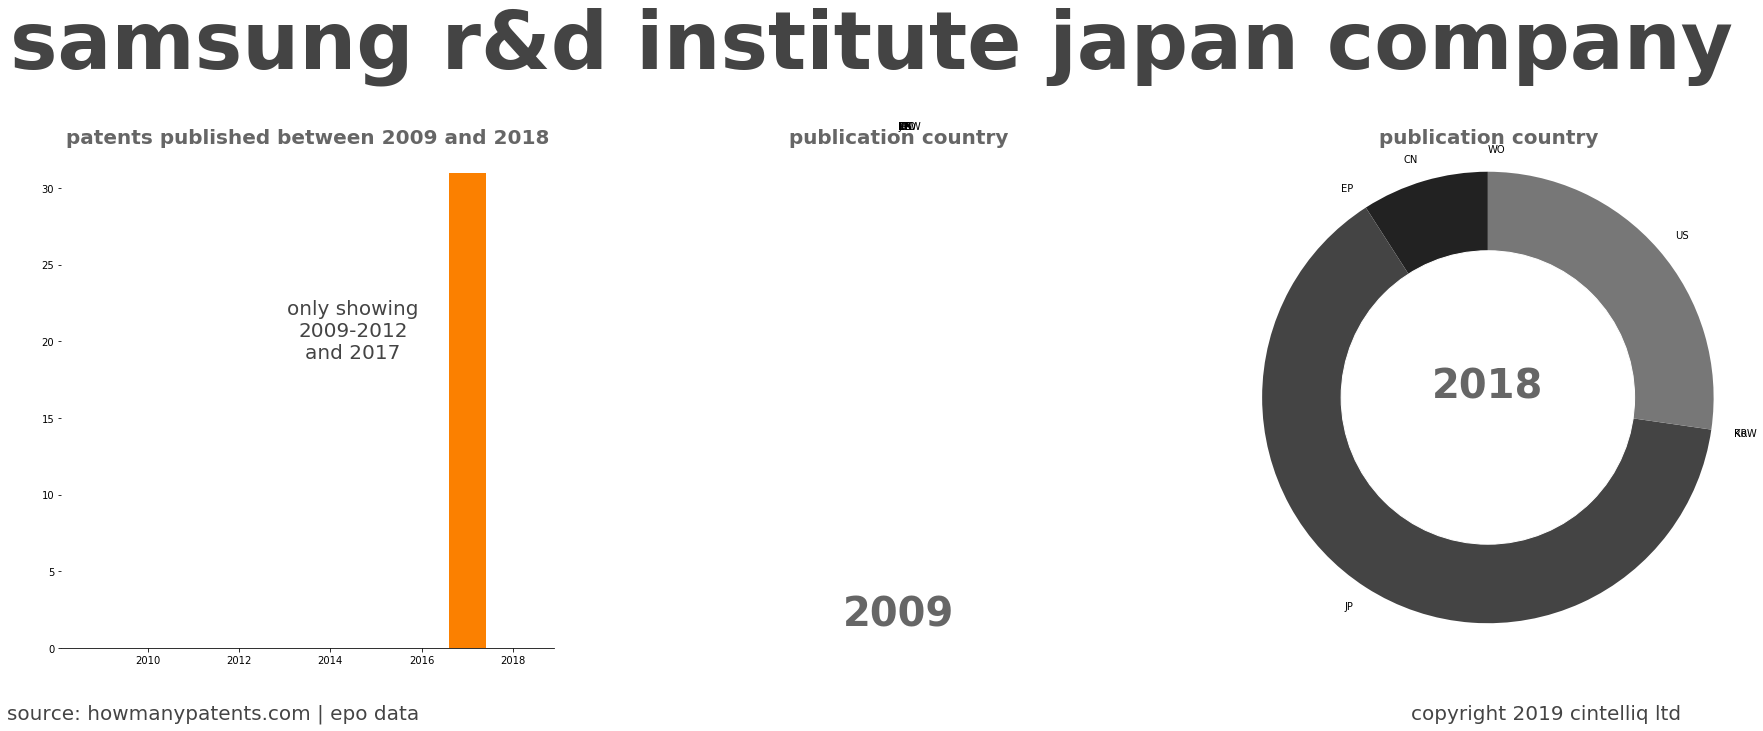 summary of patents for Samsung R&D Institute Japan Company